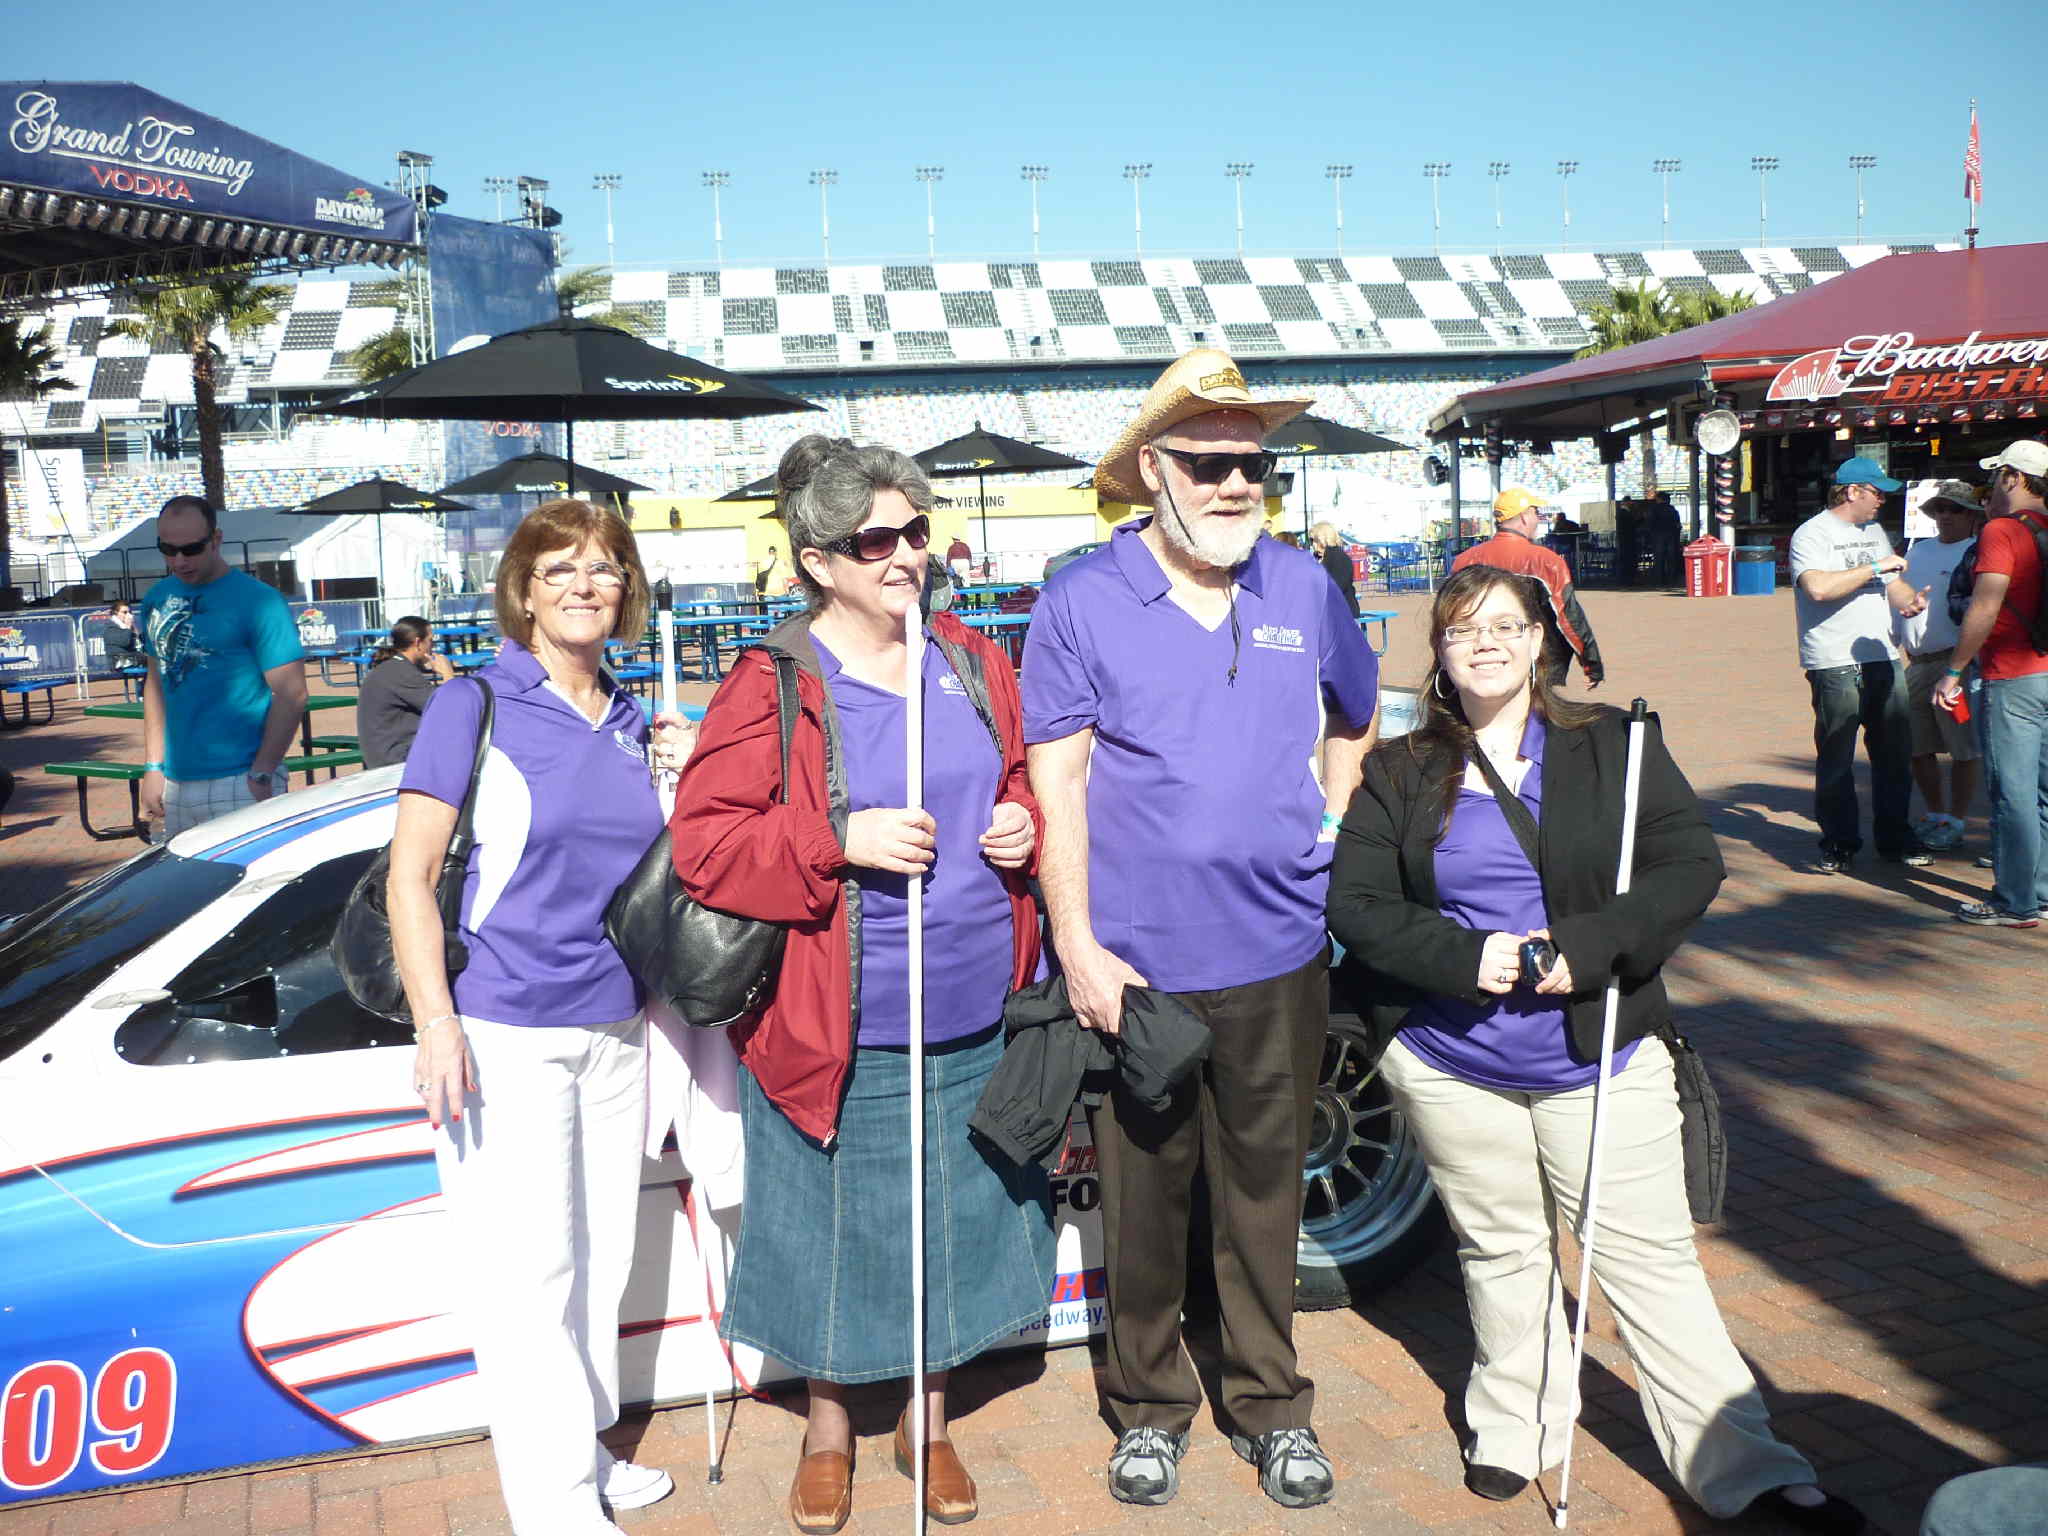 Pamela and John Glisson, Angela Dehart and Cathy Jackson standing in front of a race car at the race track